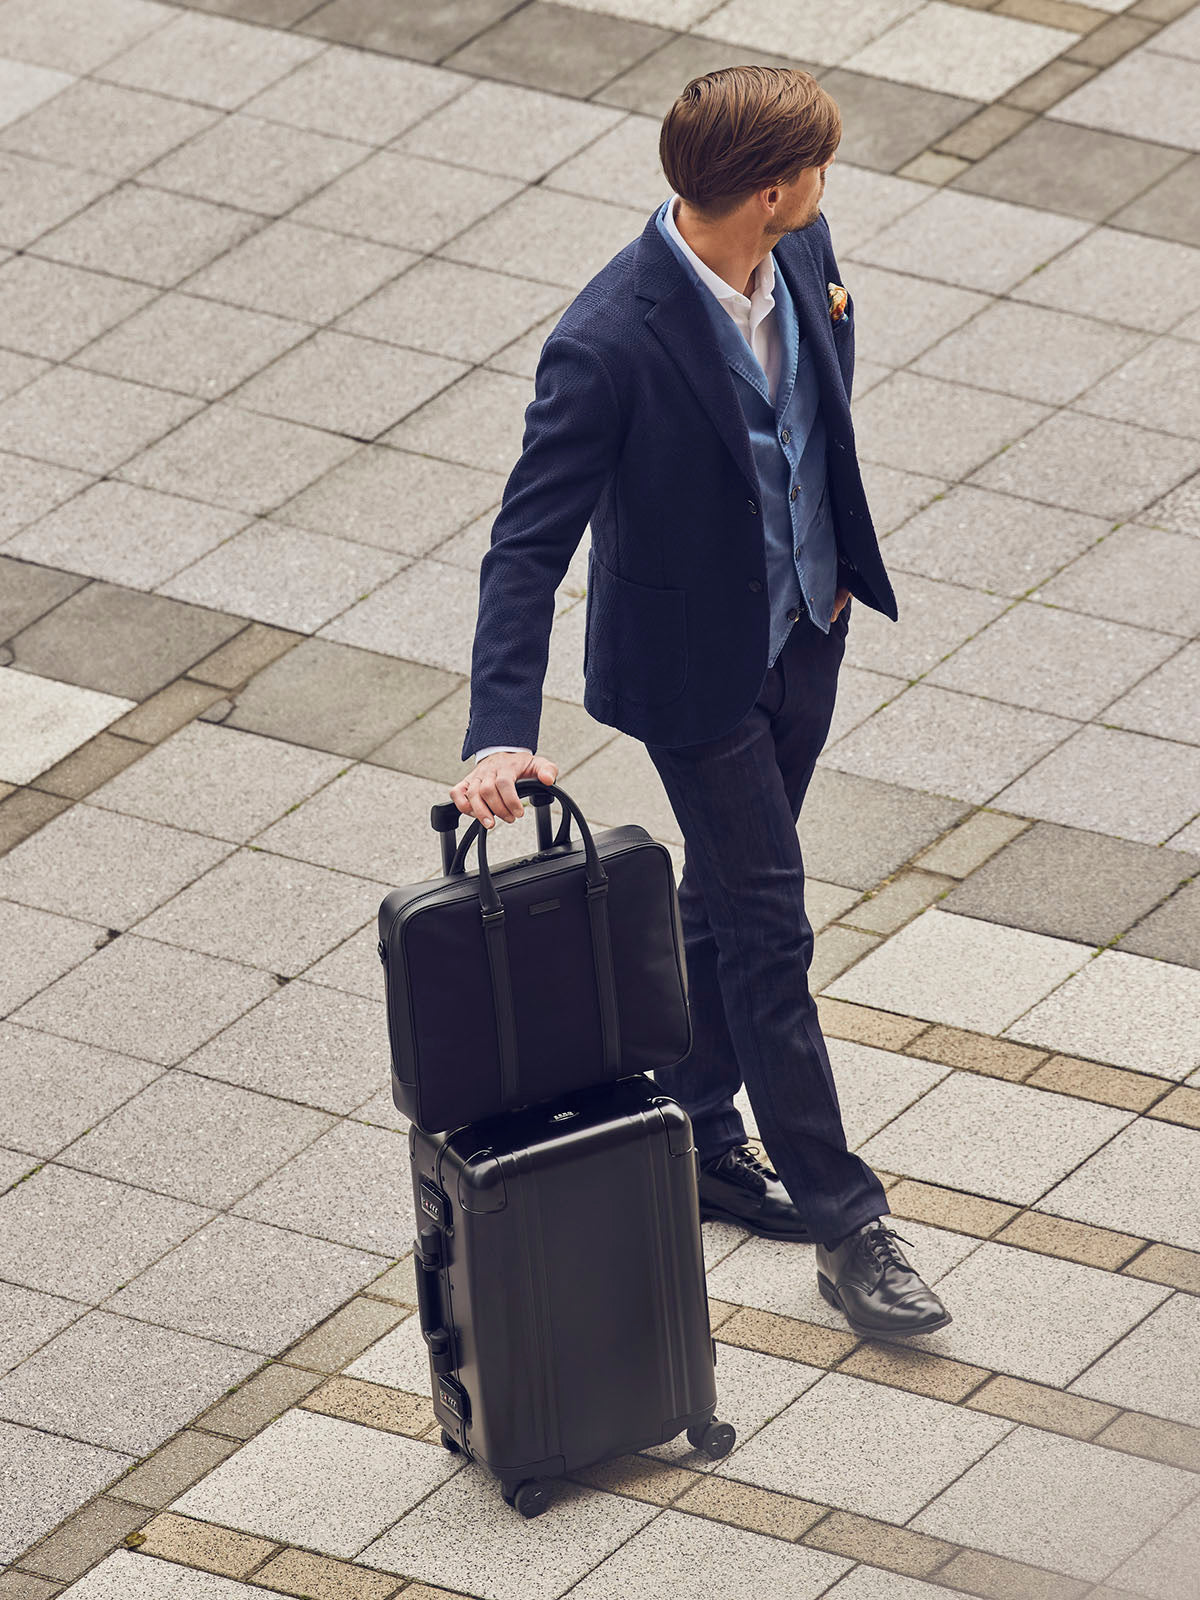 Premium-Quality Carry-On Luggage, Suitcases, Bags and Accessories 